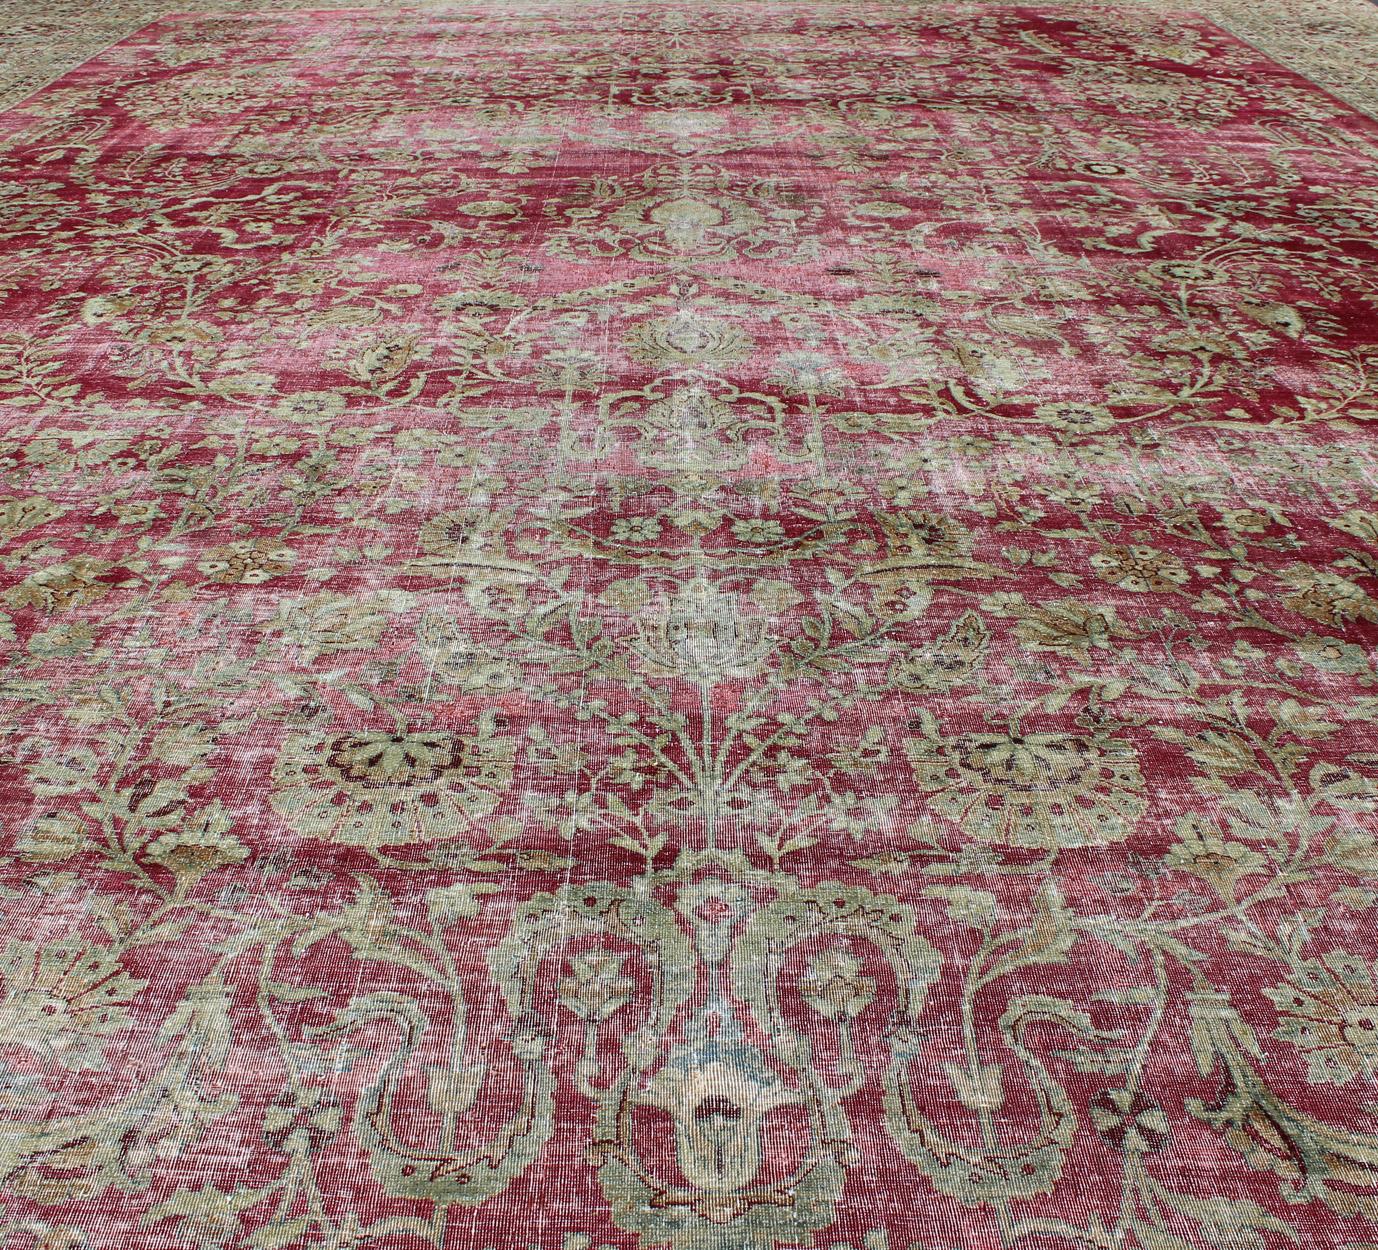 Distressed Antique Persian Lavar Kerman Rug in All-Over Intricate Floral Design For Sale 5